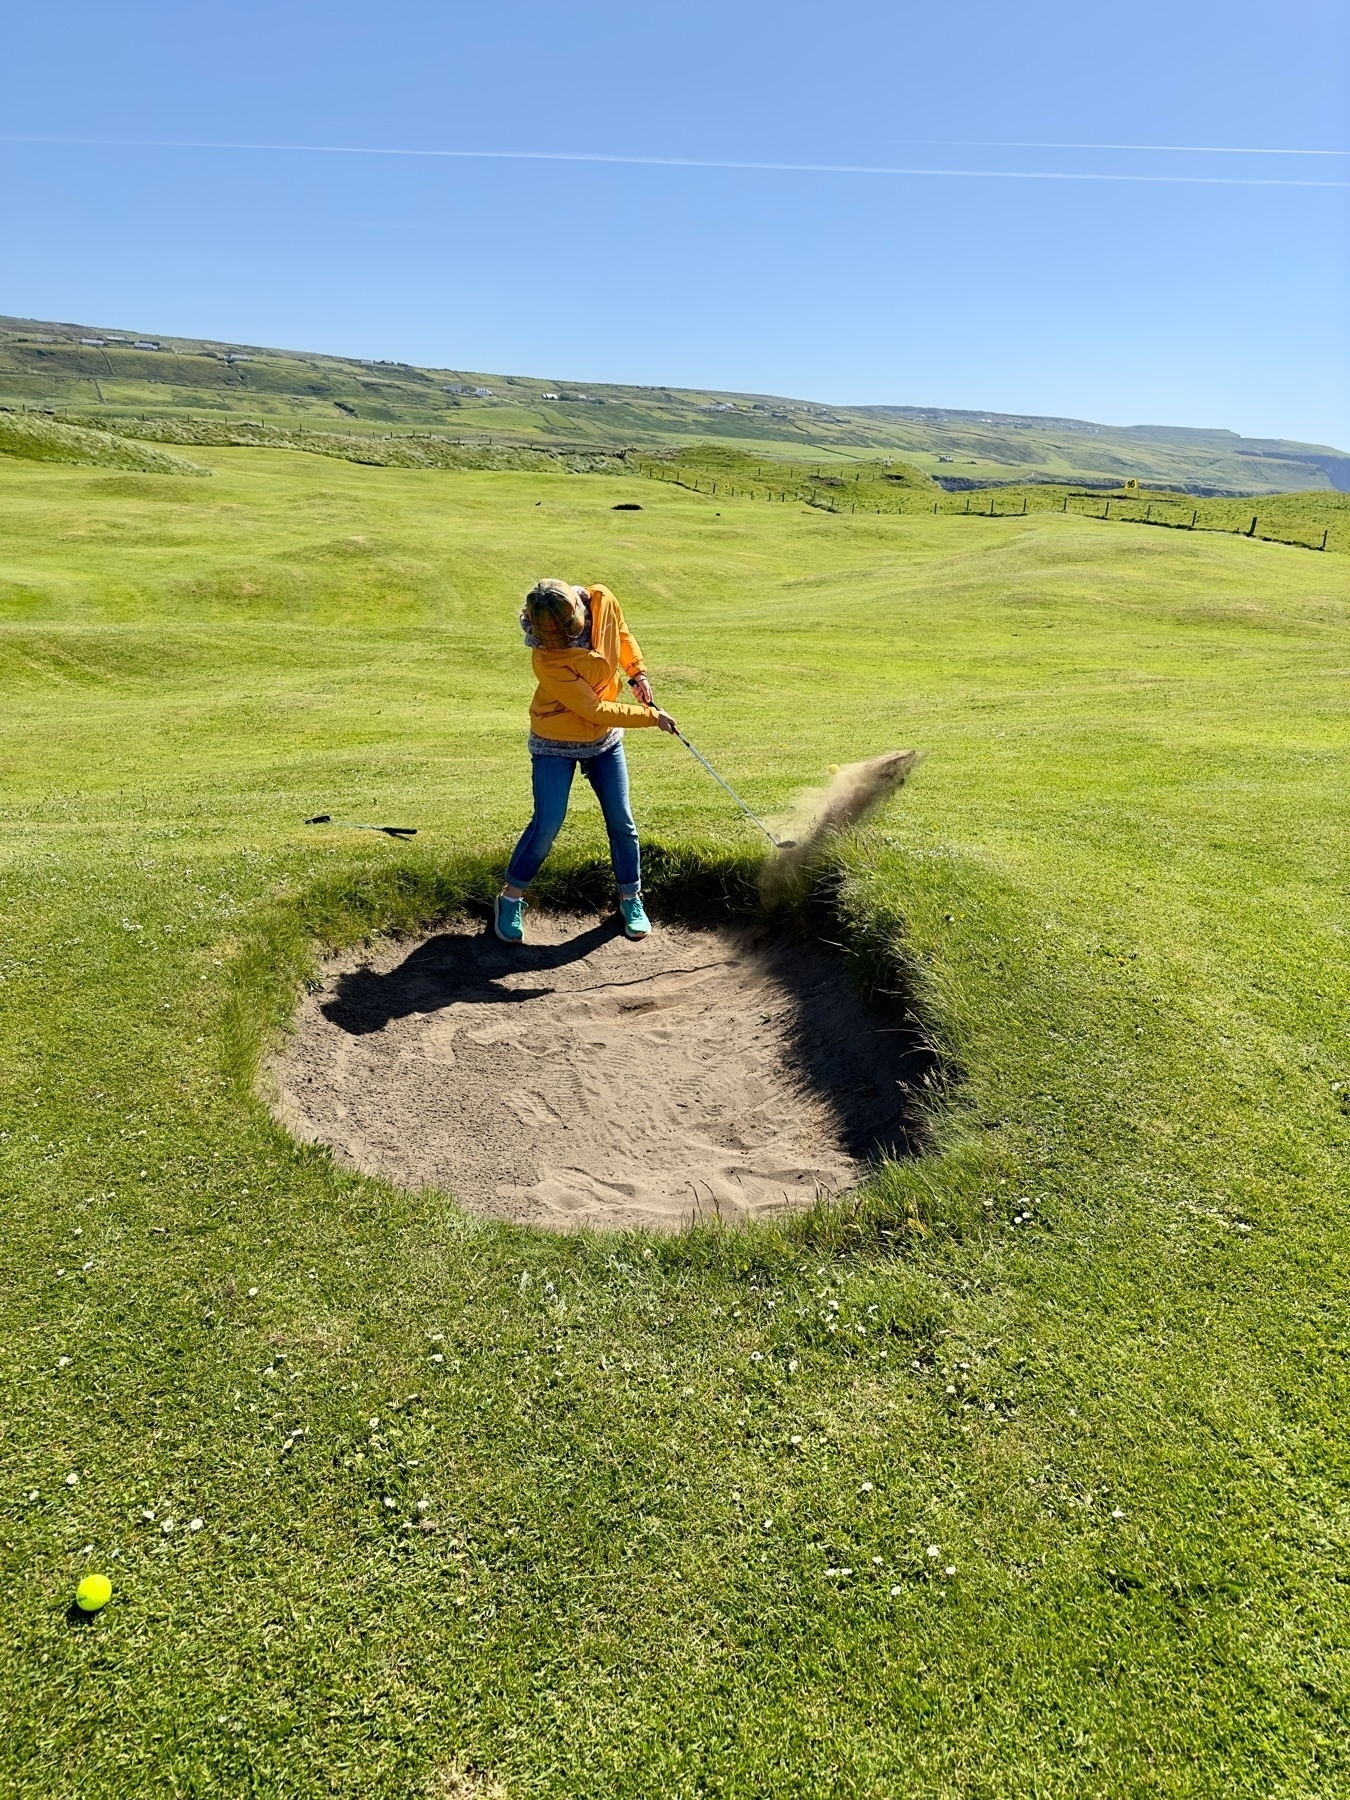 Auto-generated description: A person in a yellow shirt and blue jeans is hitting a golf ball out of a sand trap on a grassy golf course.